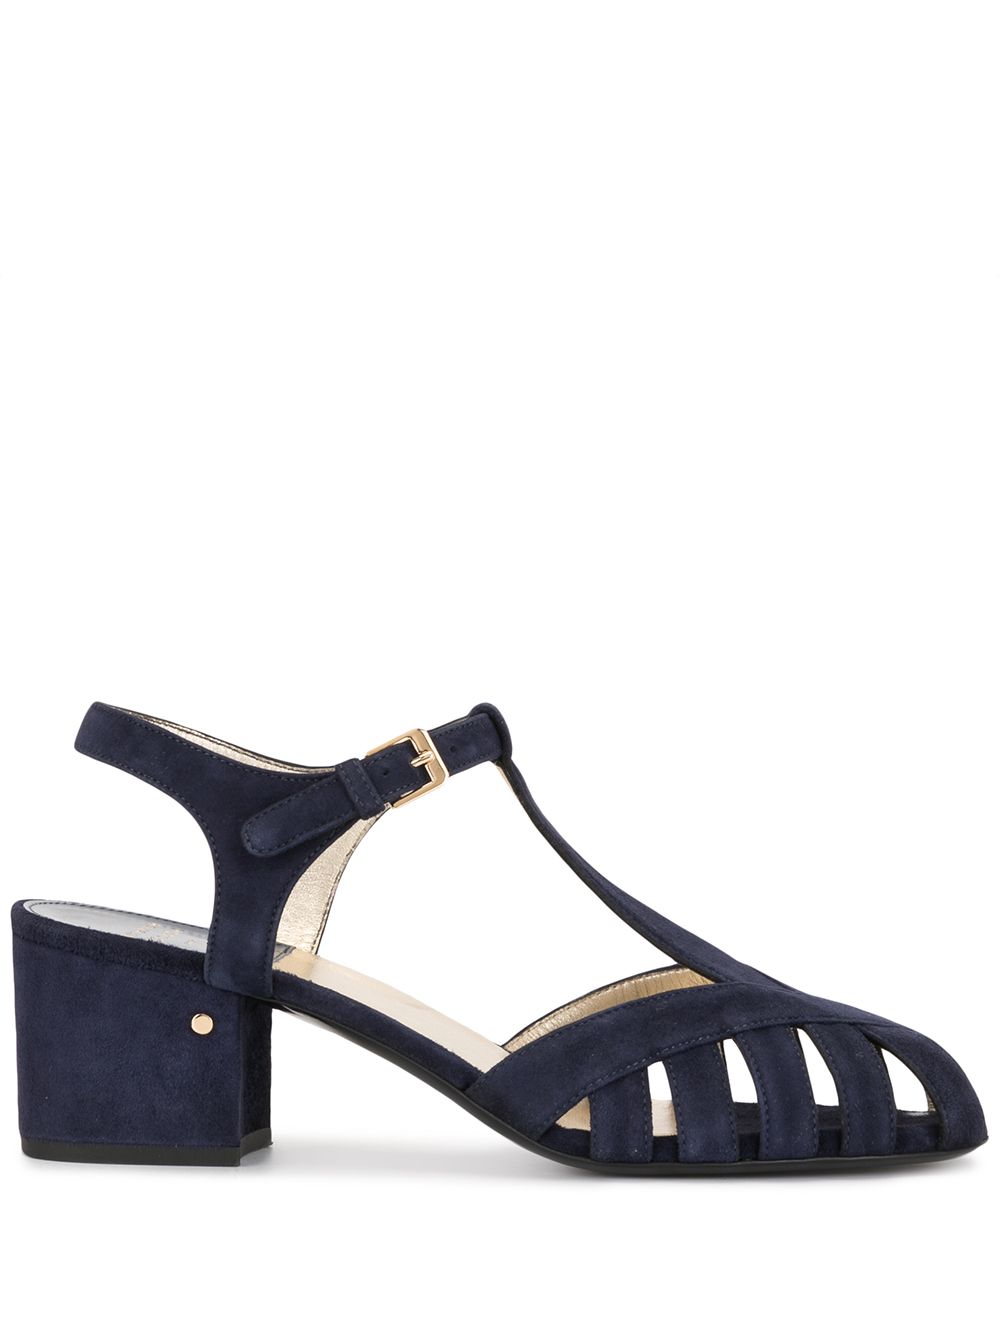 Laurence Dacade Alexia Sandals In Blue